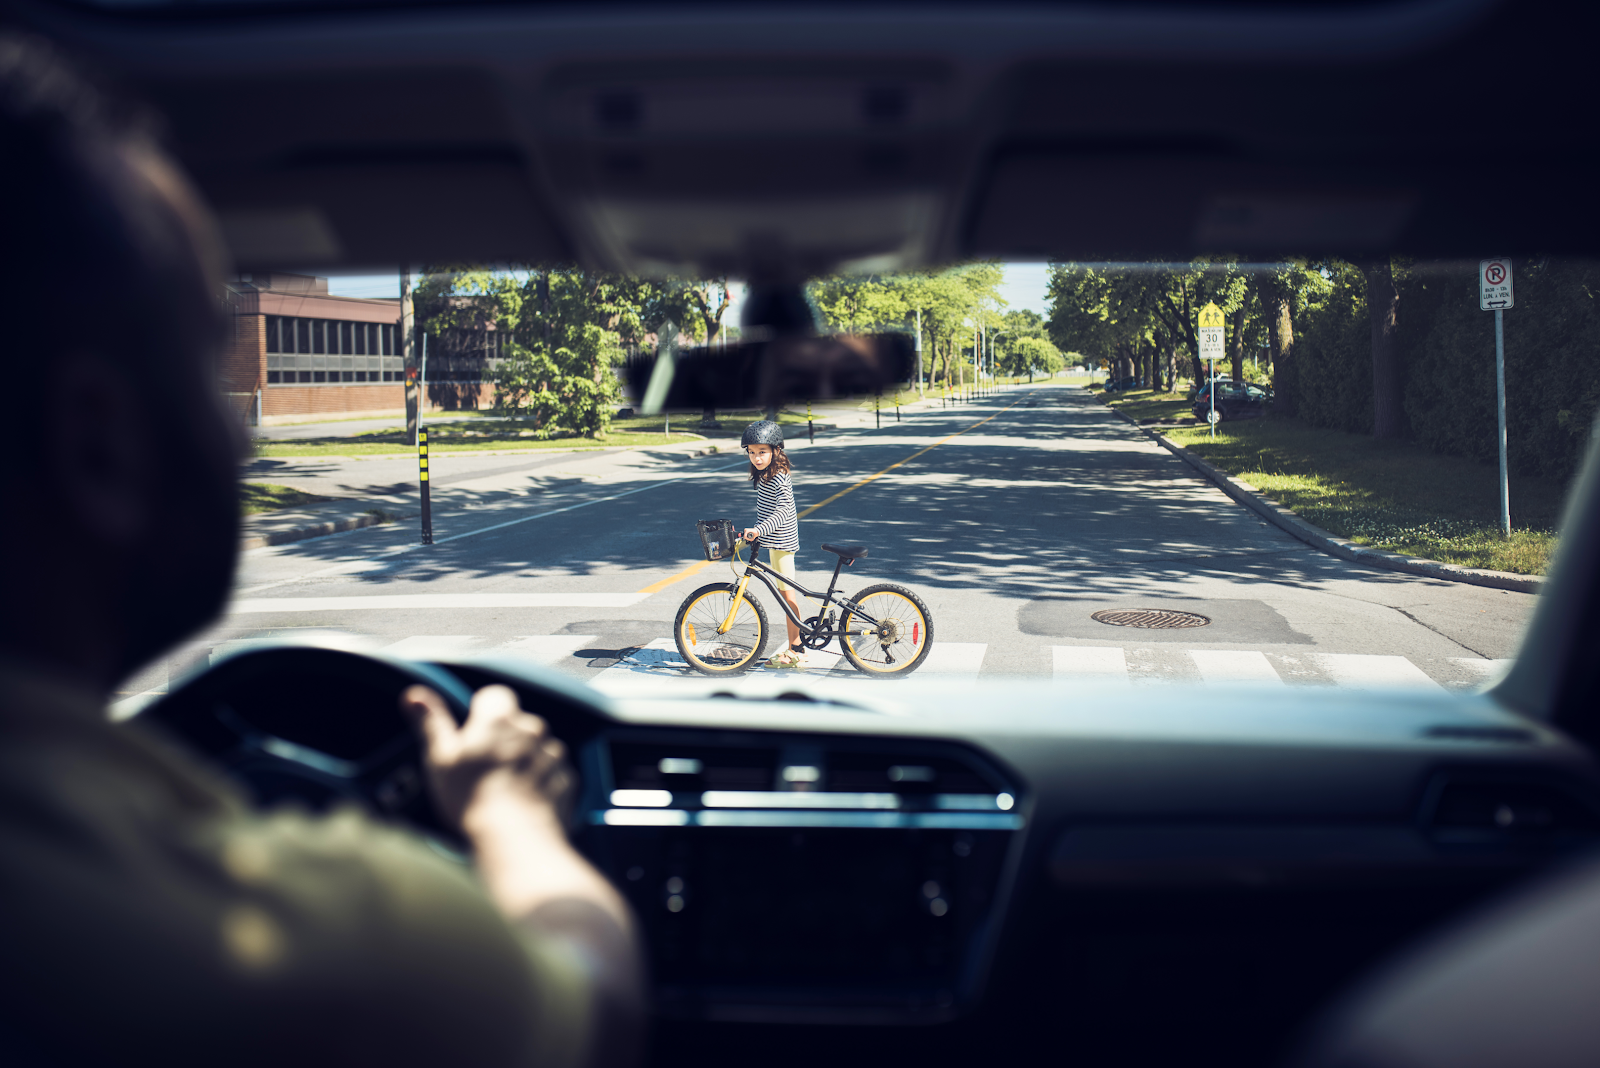 car driving at bicyclist crossing the road, bicycle accident scene